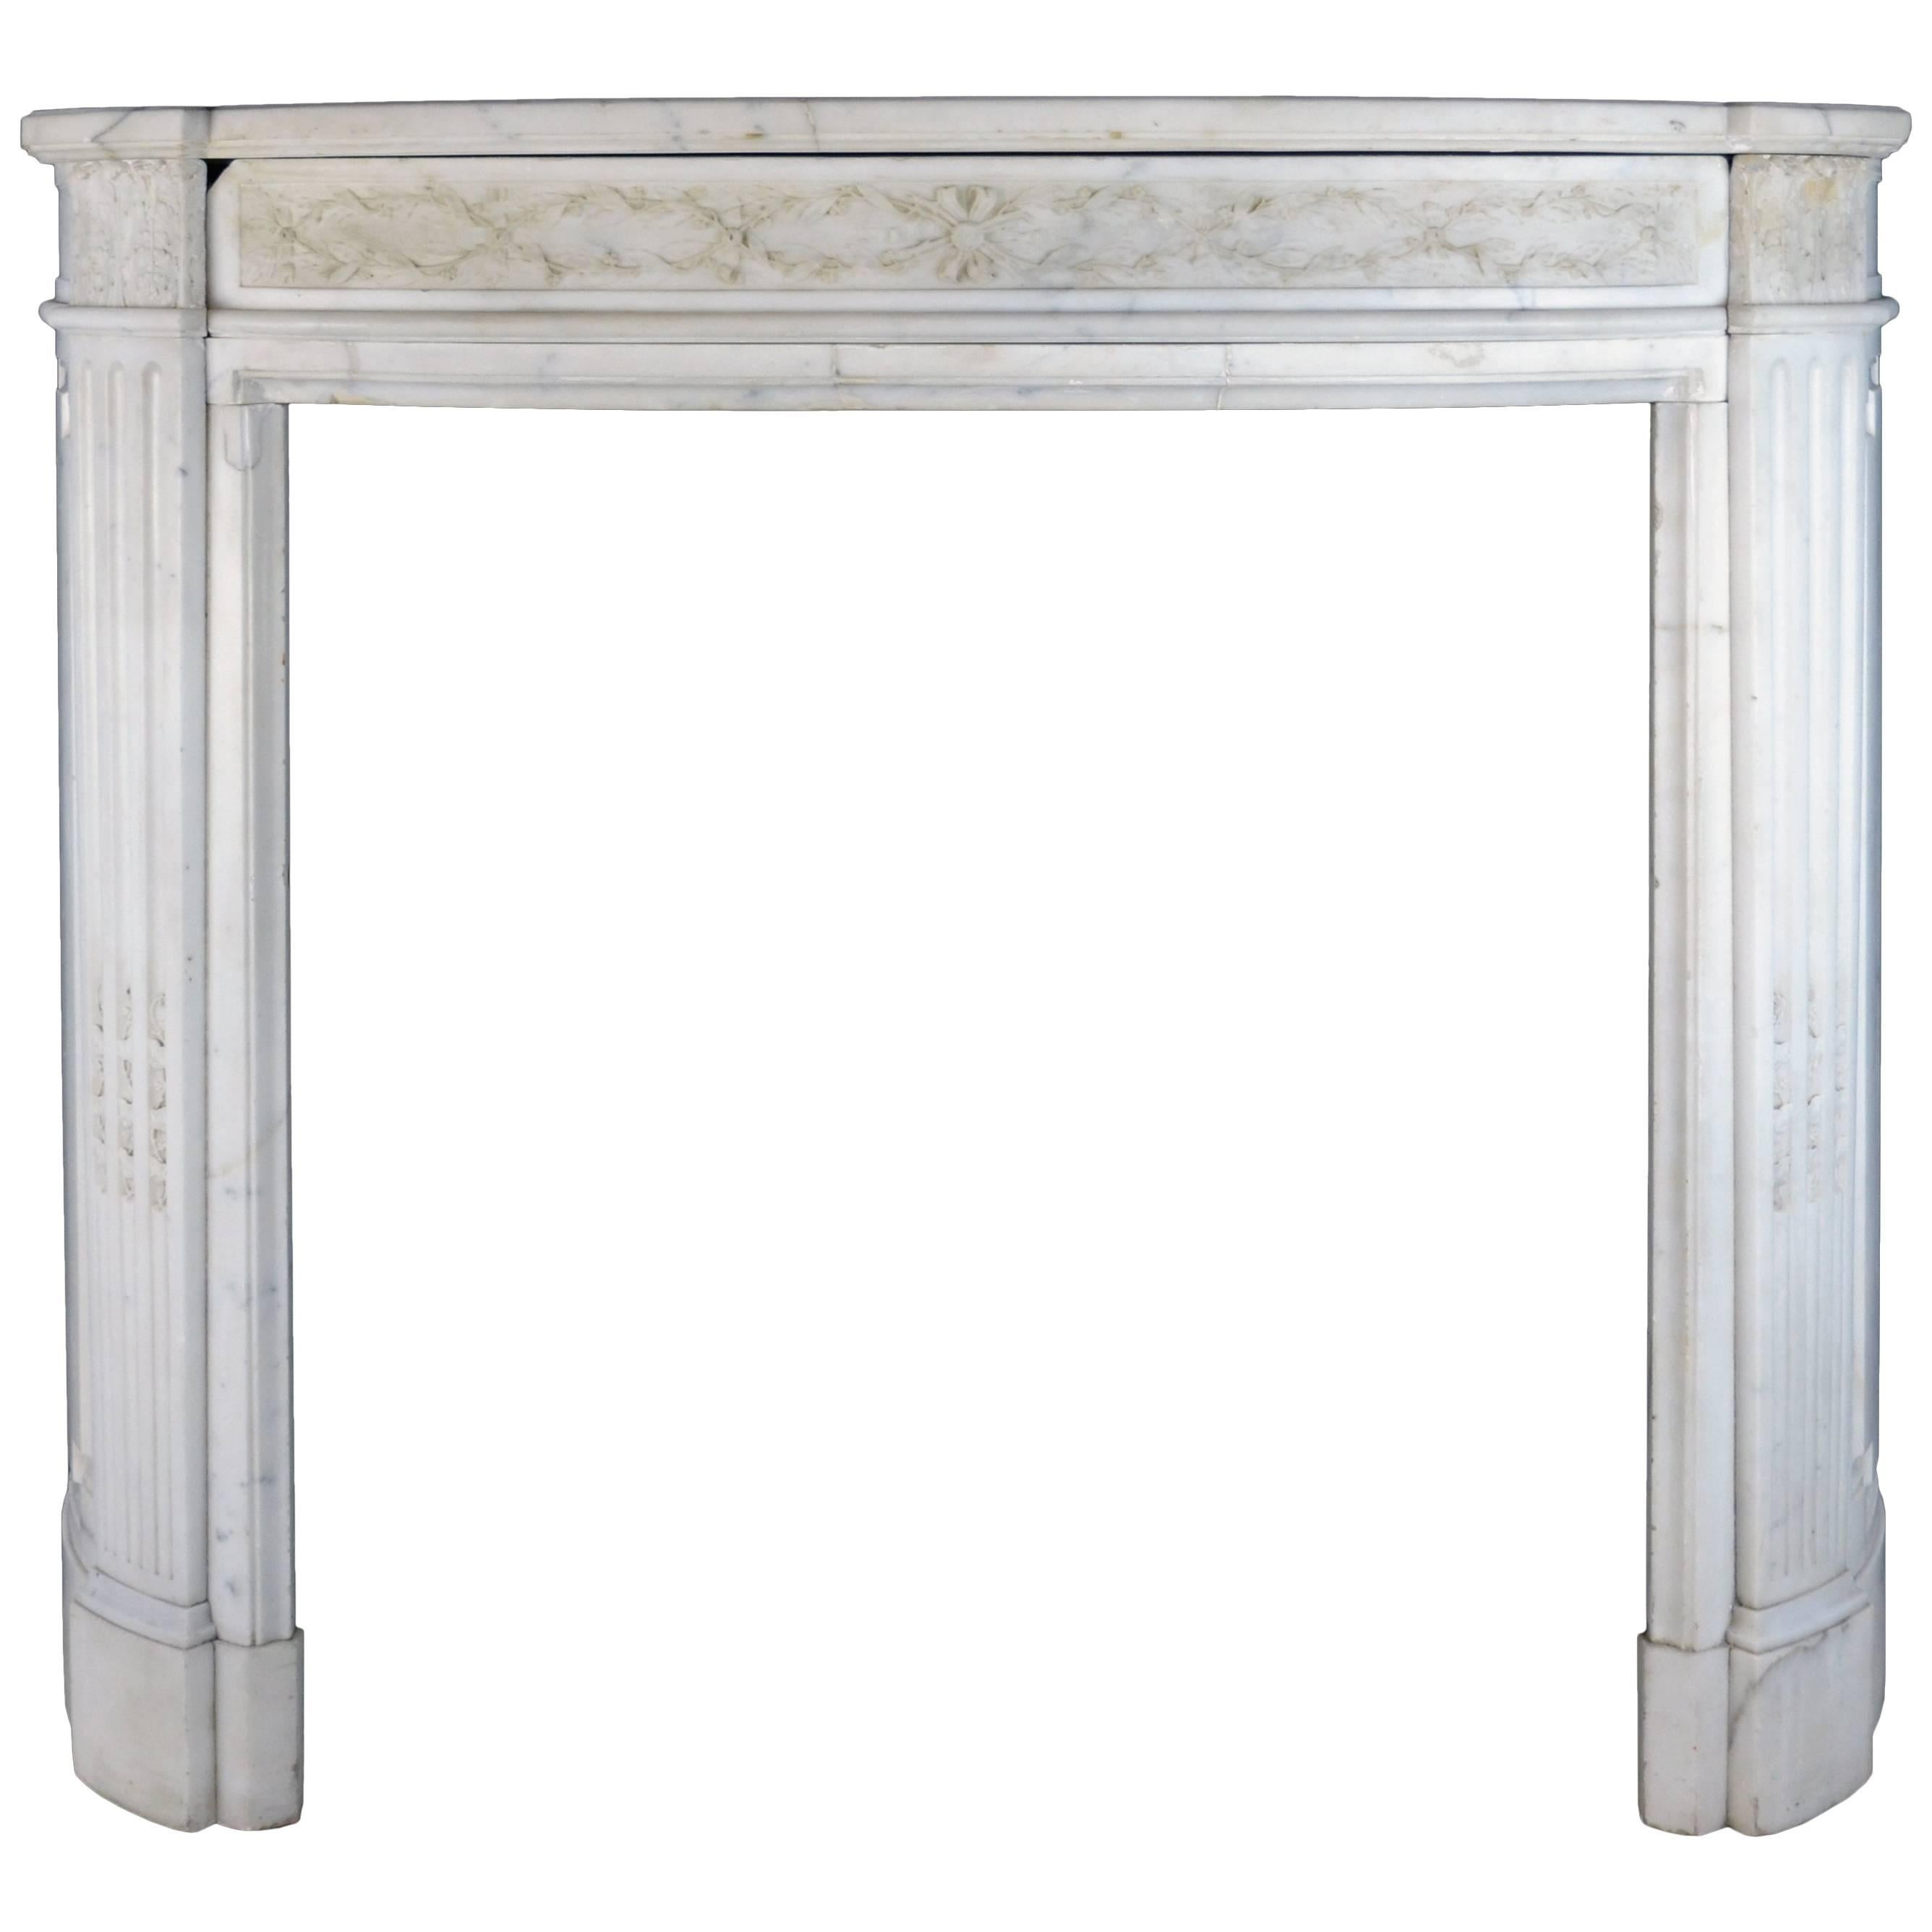 Statuary Marble Bow Fronted Louis XVI Style Mantel with Fluted Jambs